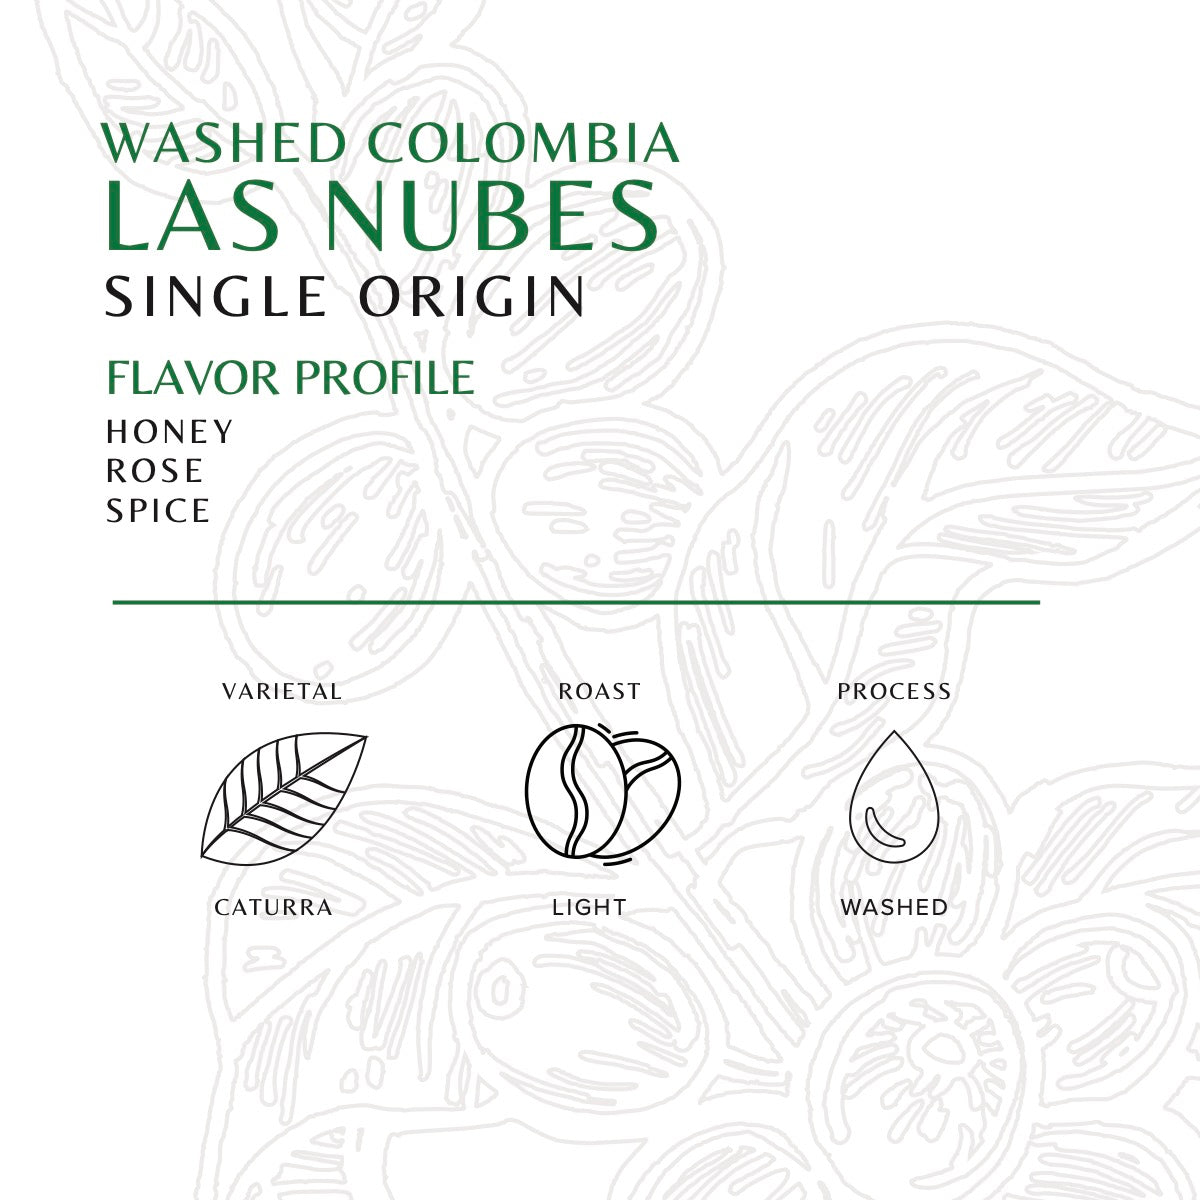 Colombia - Las Nubes Washed